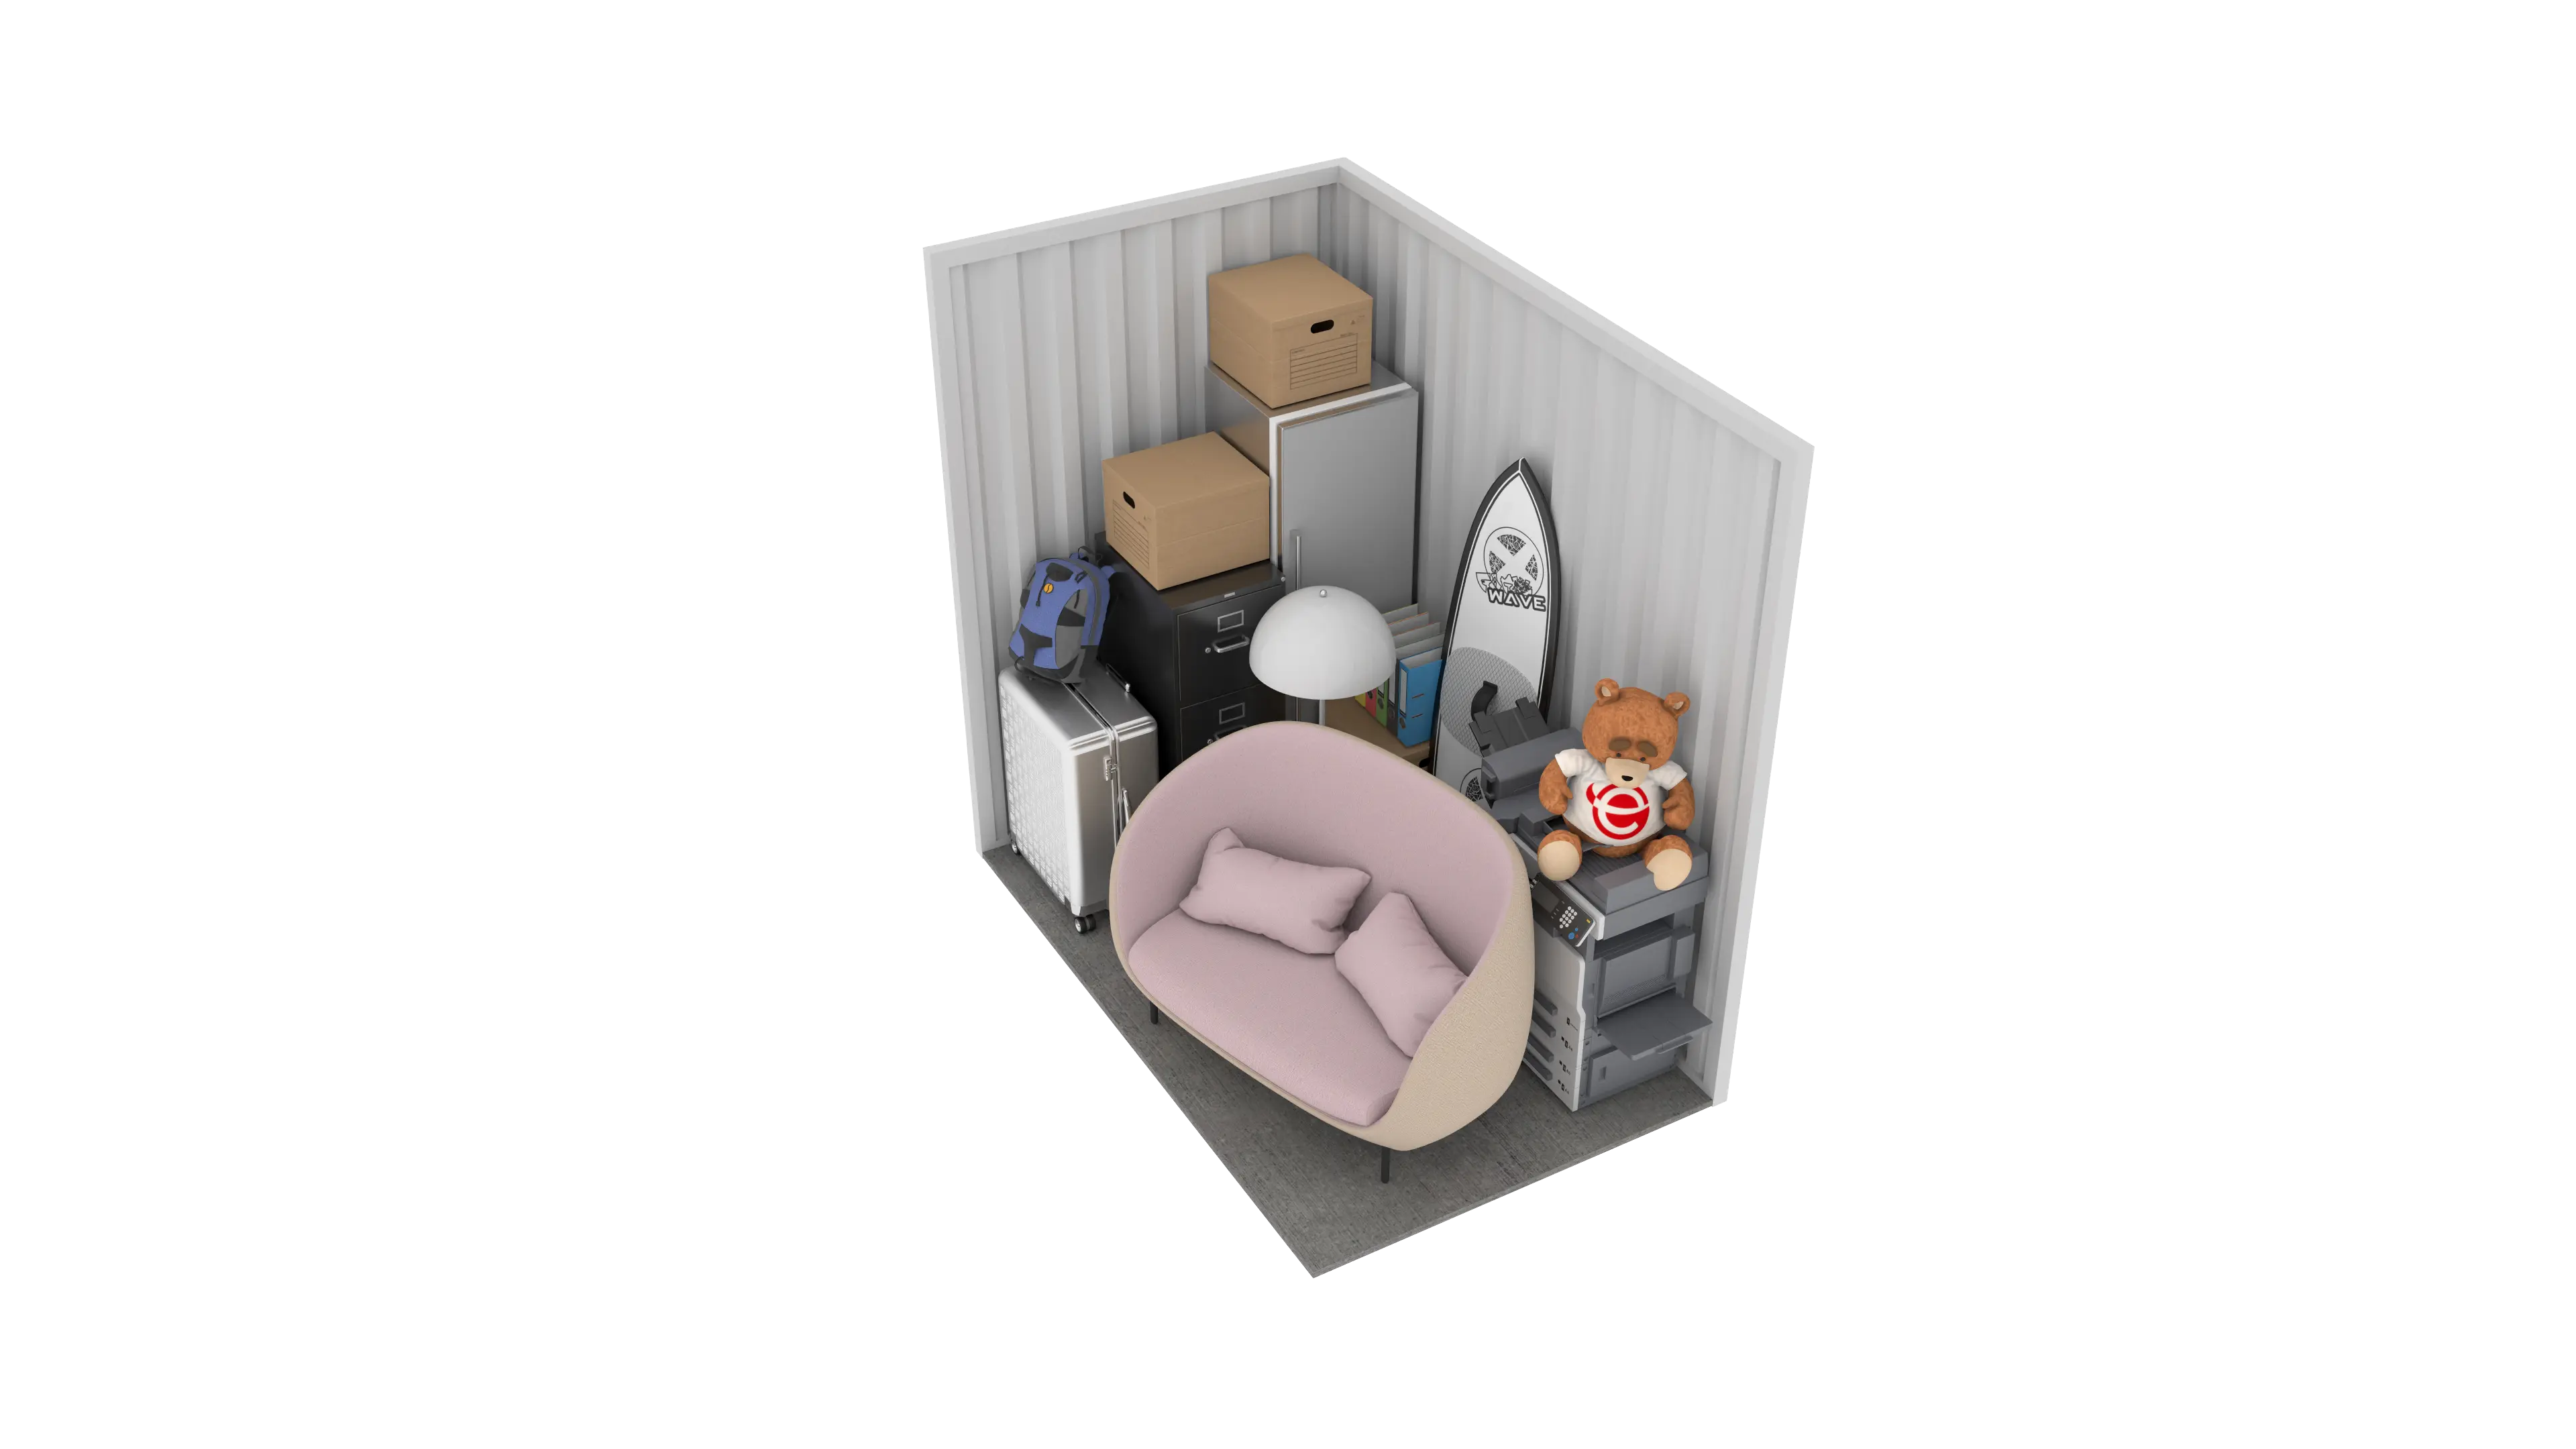 Isometric still of a storage unit with a size of 49 sqft